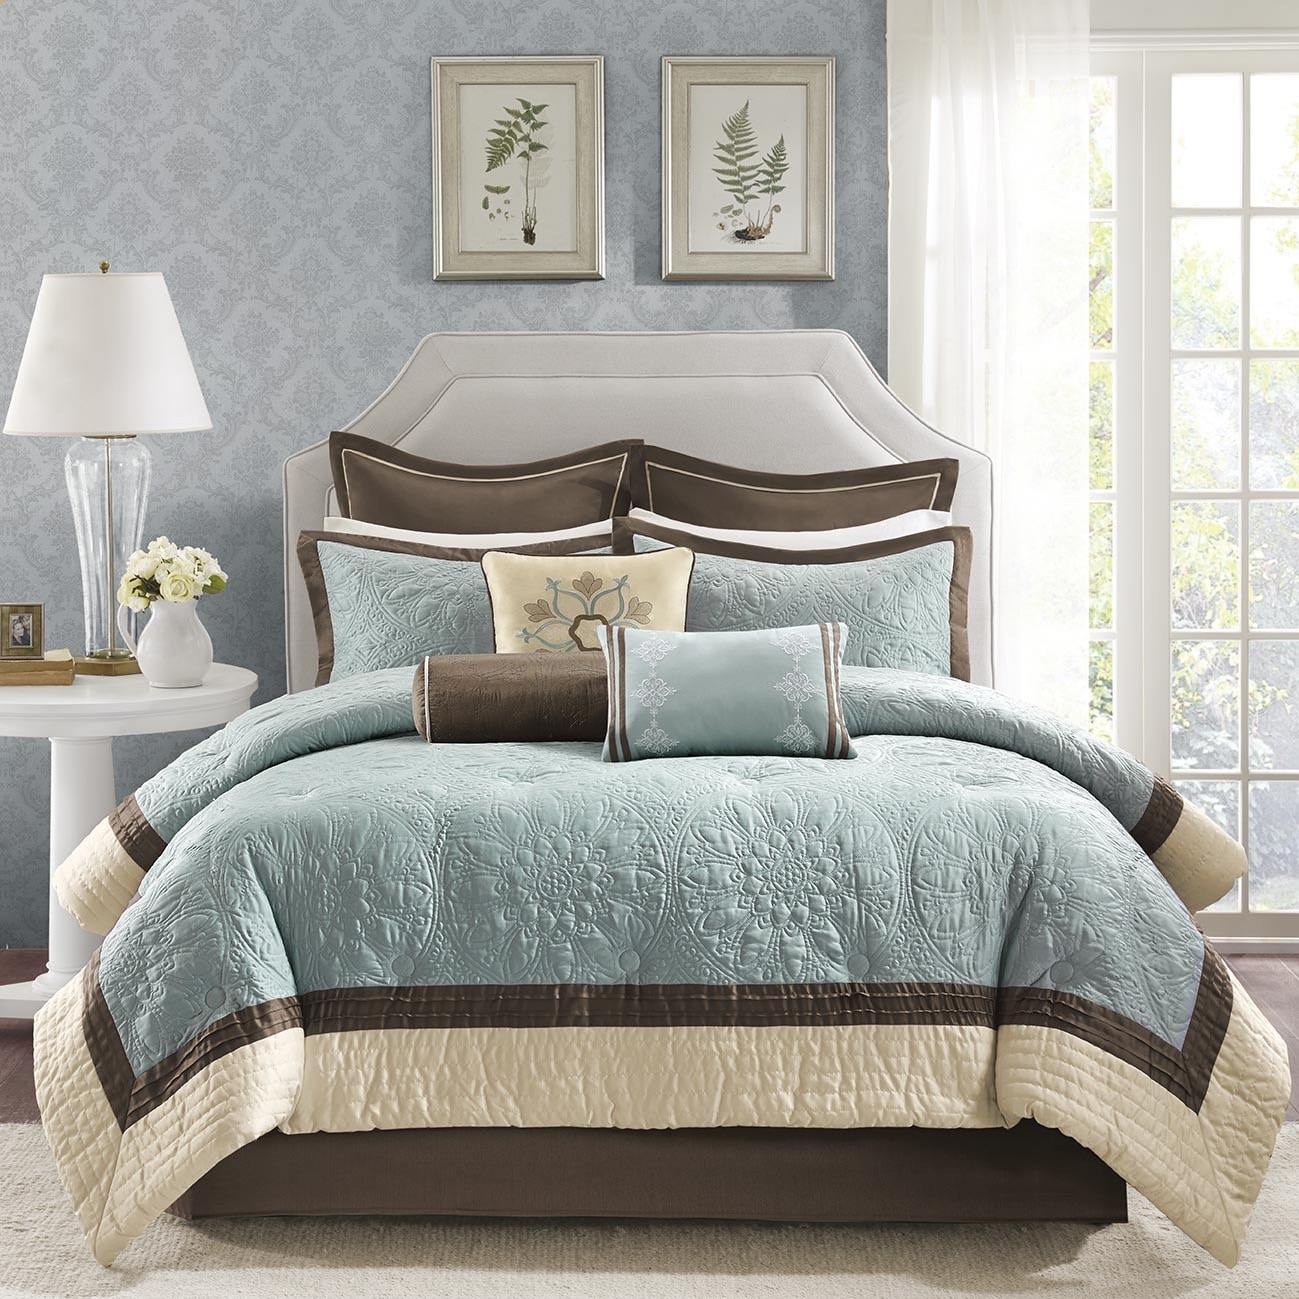 Blue Floral Comforters and Sets - Bed Bath & Beyond